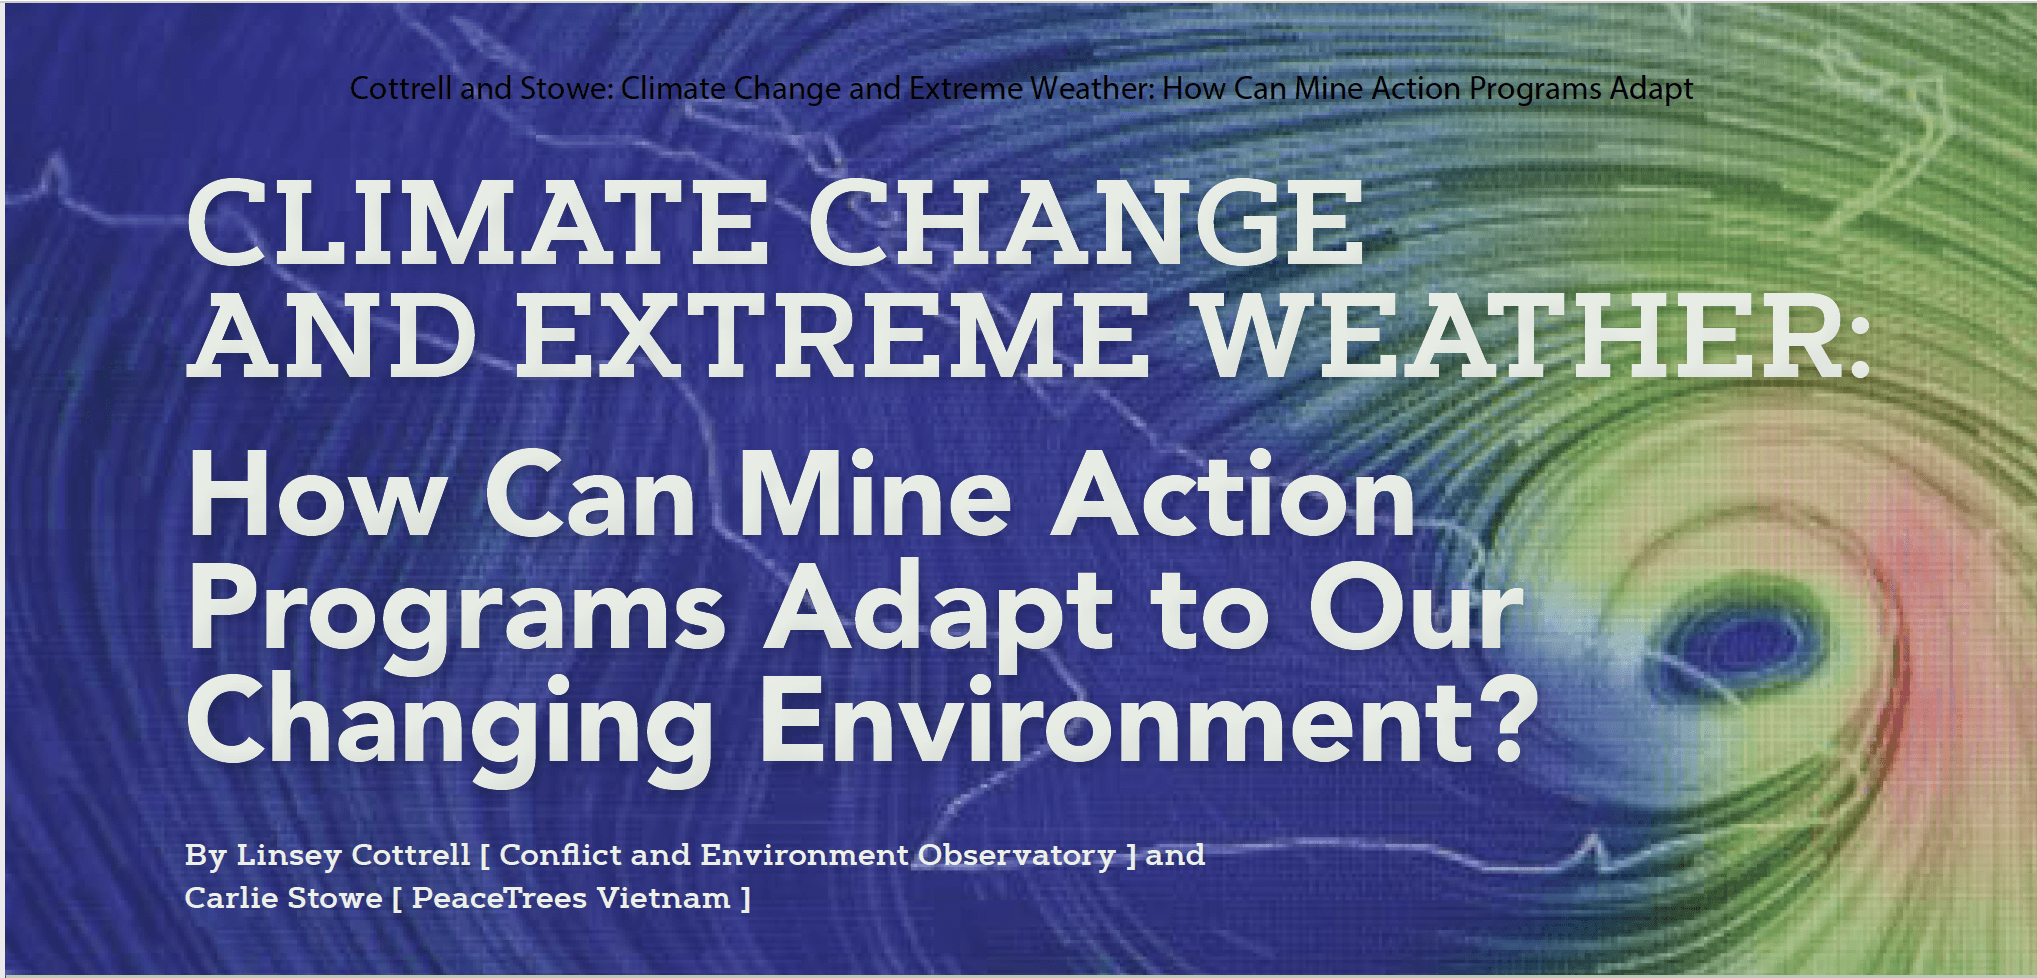 Climate Change and Extreme Weather: How Can Mine Action Programs Adapt to Our Changing Environment?